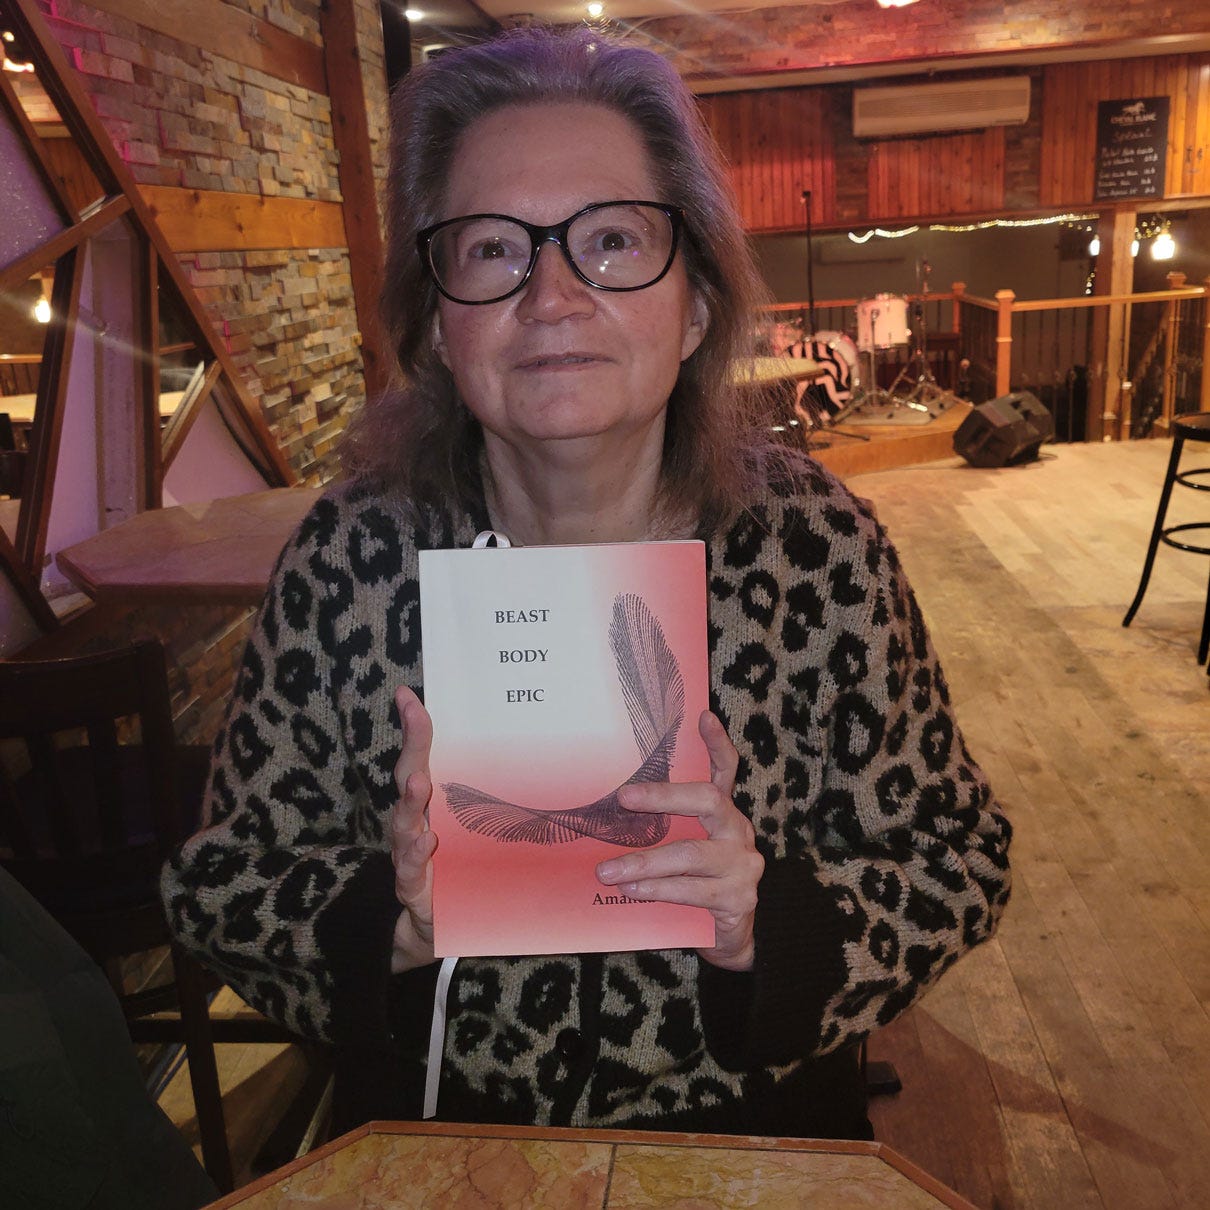 Amanda wears a leopard print sweater and holds a copy of Beast Body Epic at a pub in Montreal